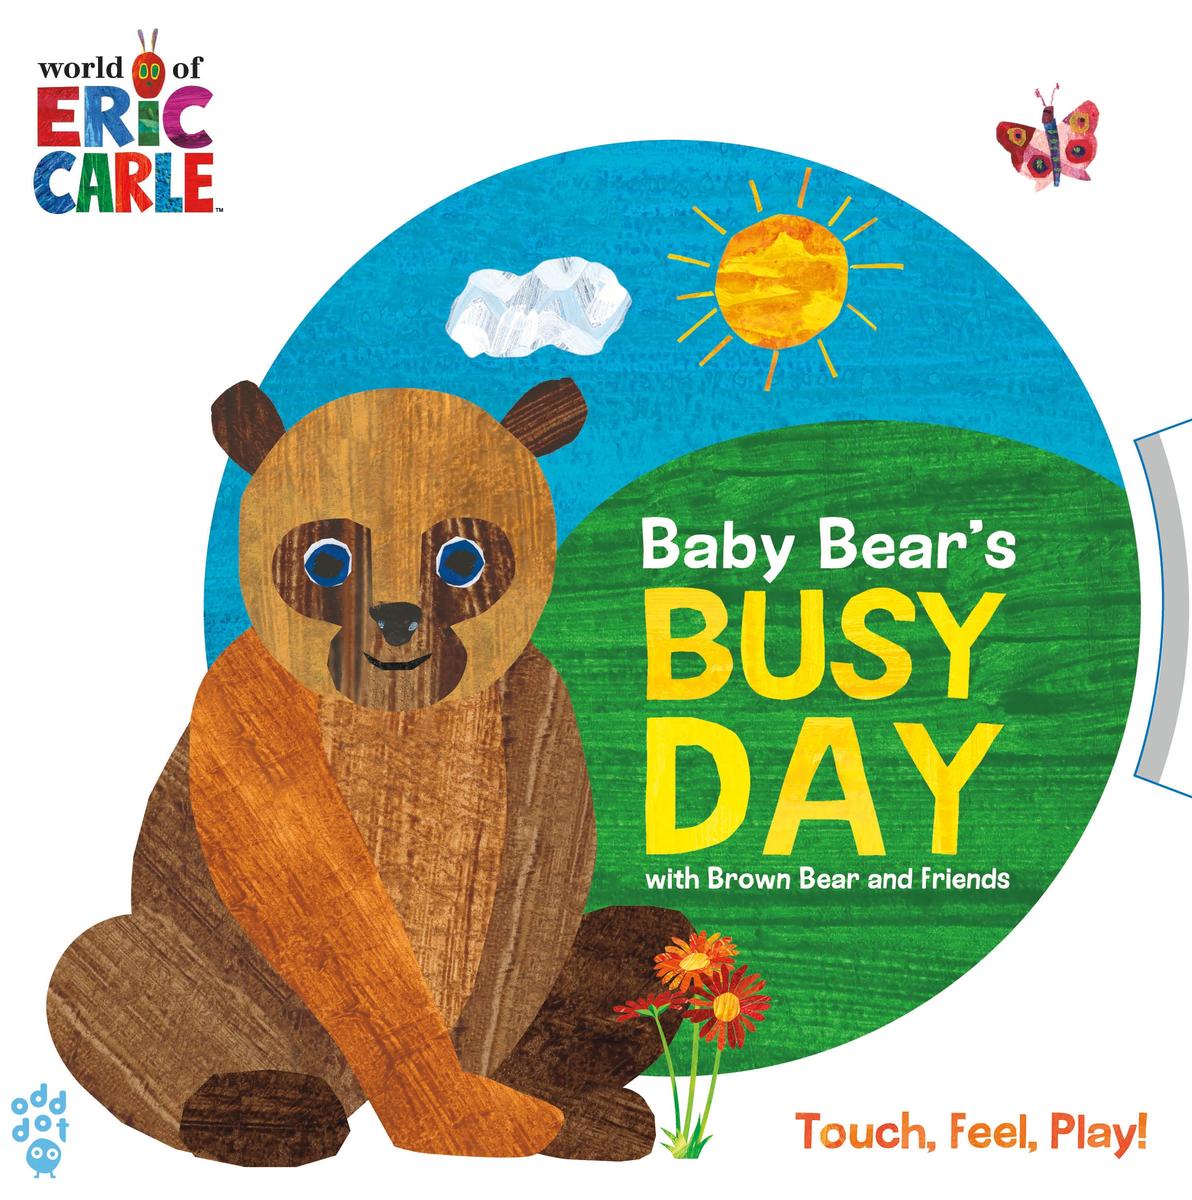 Baby Bear's Busy Day with Brown Bear and Friends (World of Eric Carle) - 